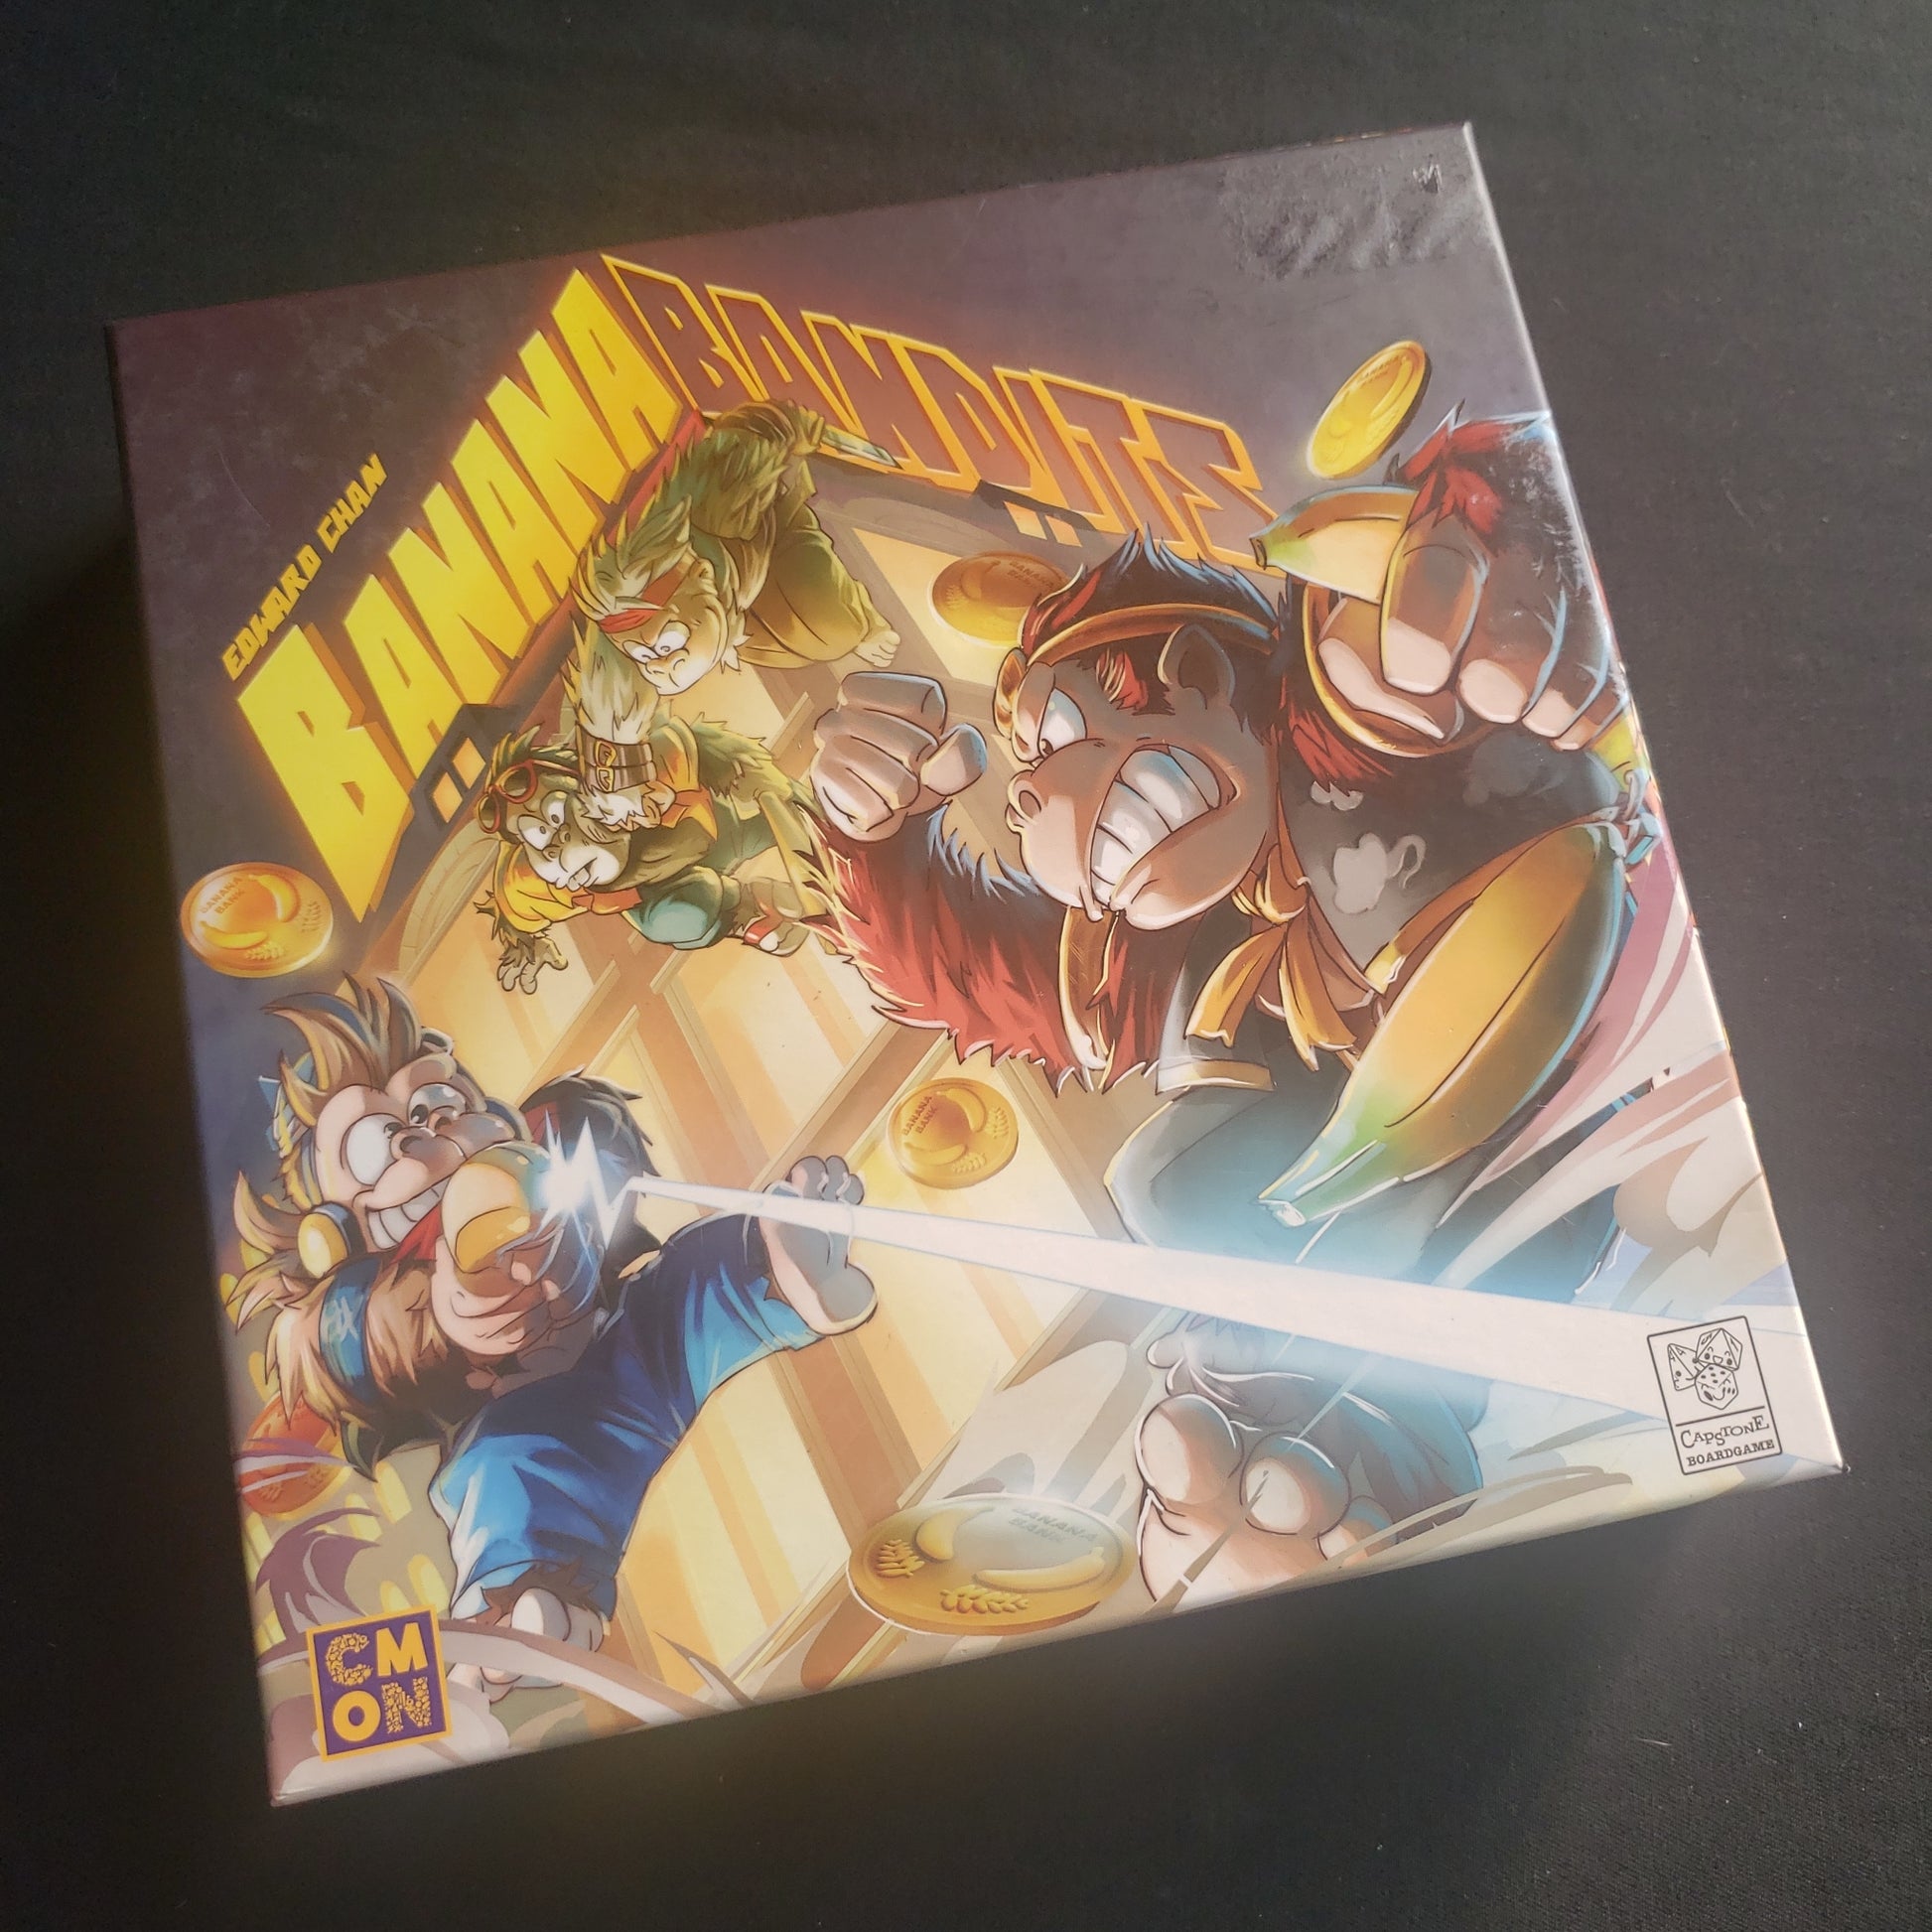 Image shows the front cover of the box of the Banana Bandits board game